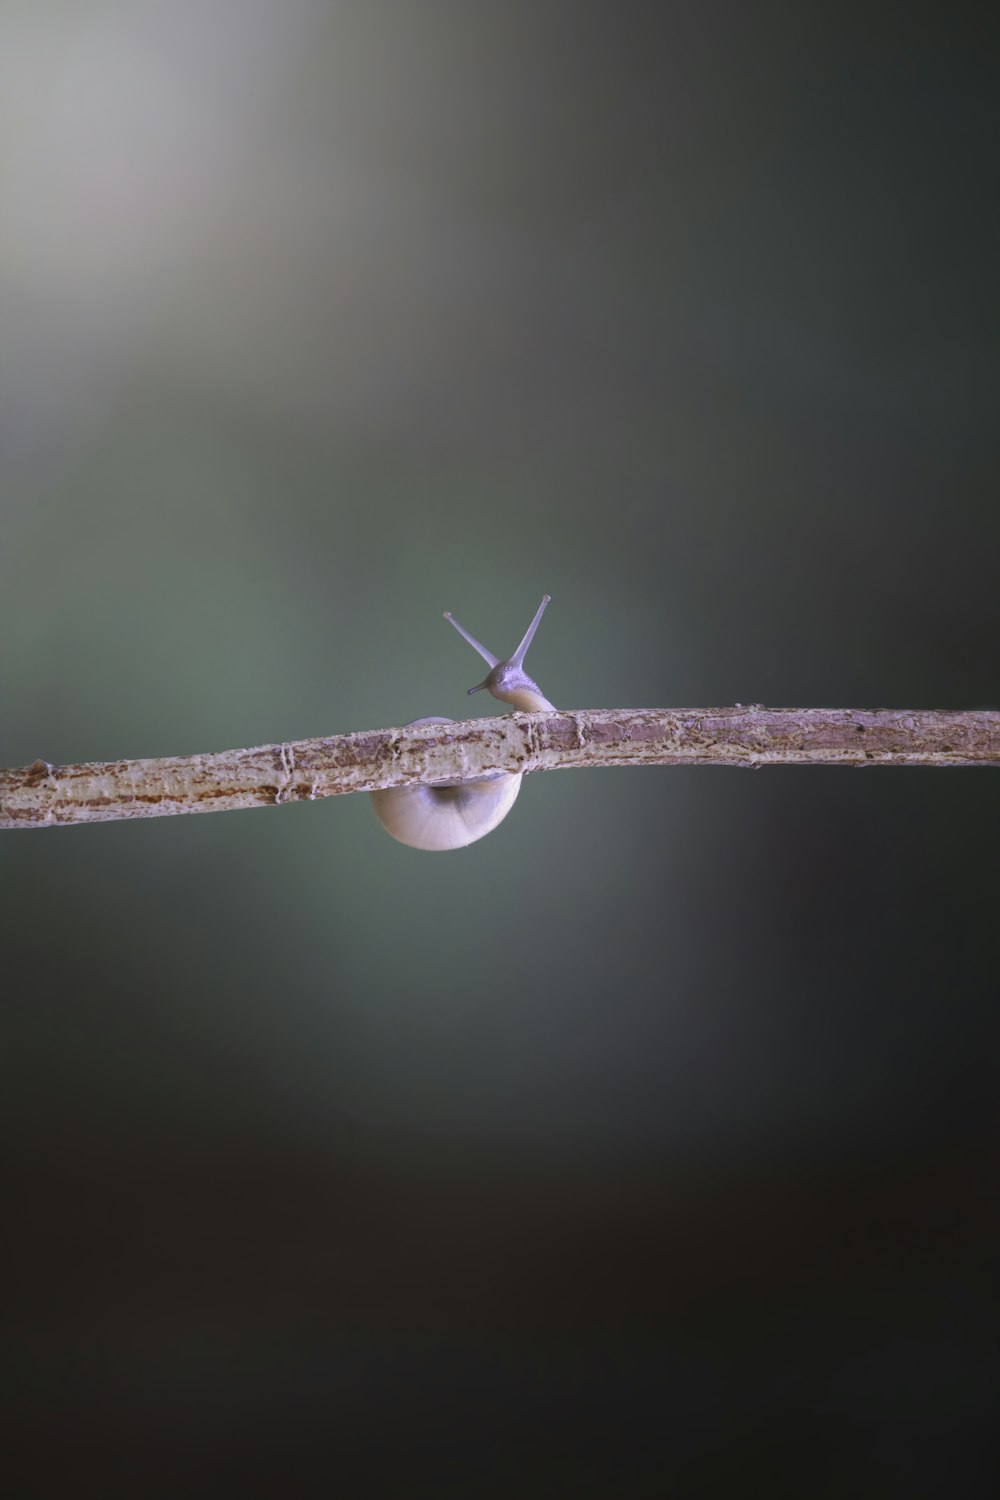 a snail is sitting on a branch with a drop of water on it